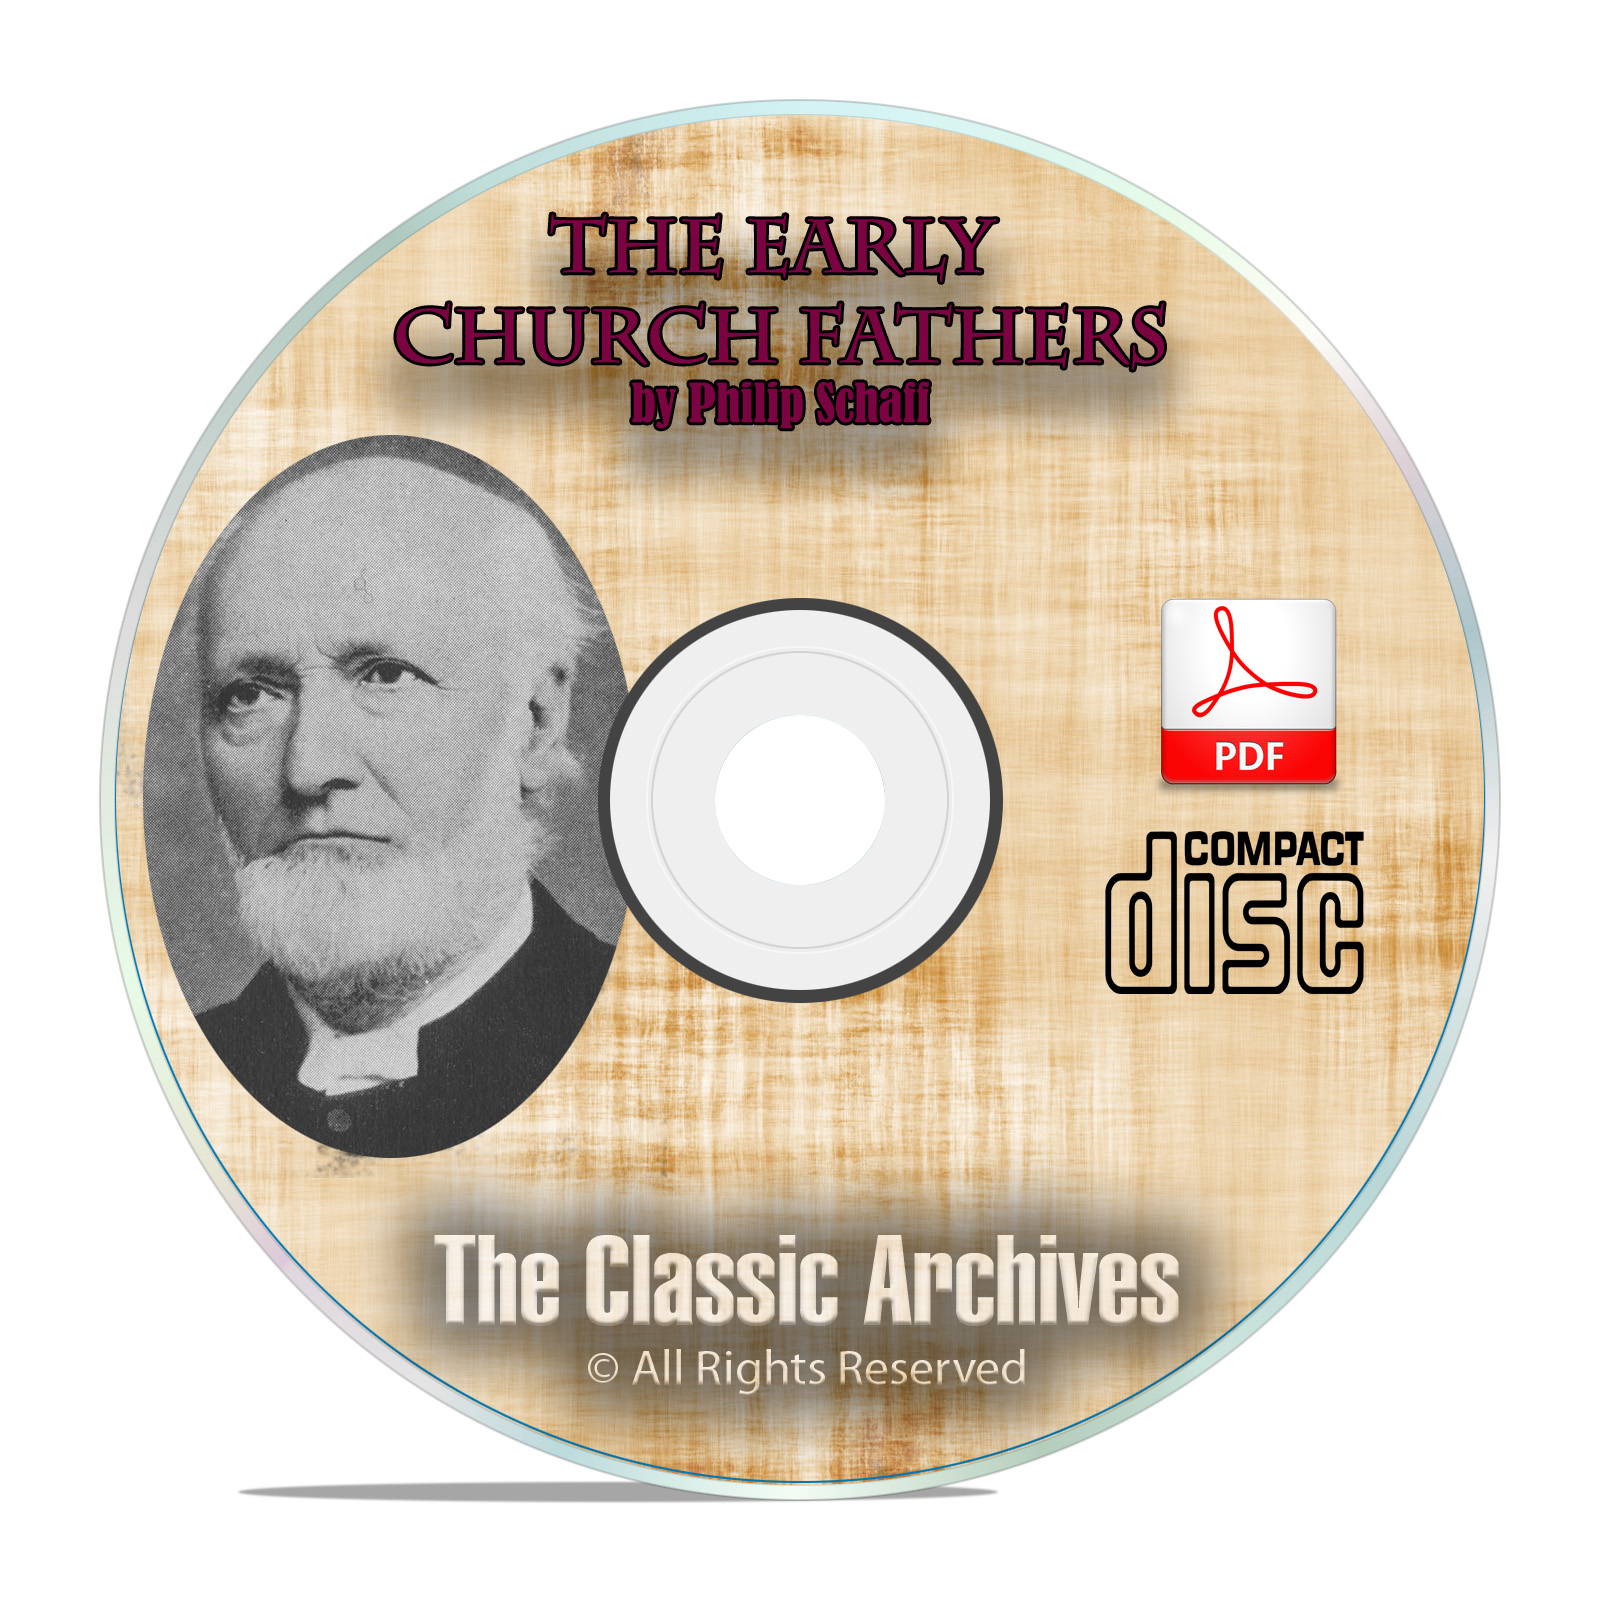 The Early Church Fathers, by Philip Schaff, 38 Volume Bible Study on CD-ROM